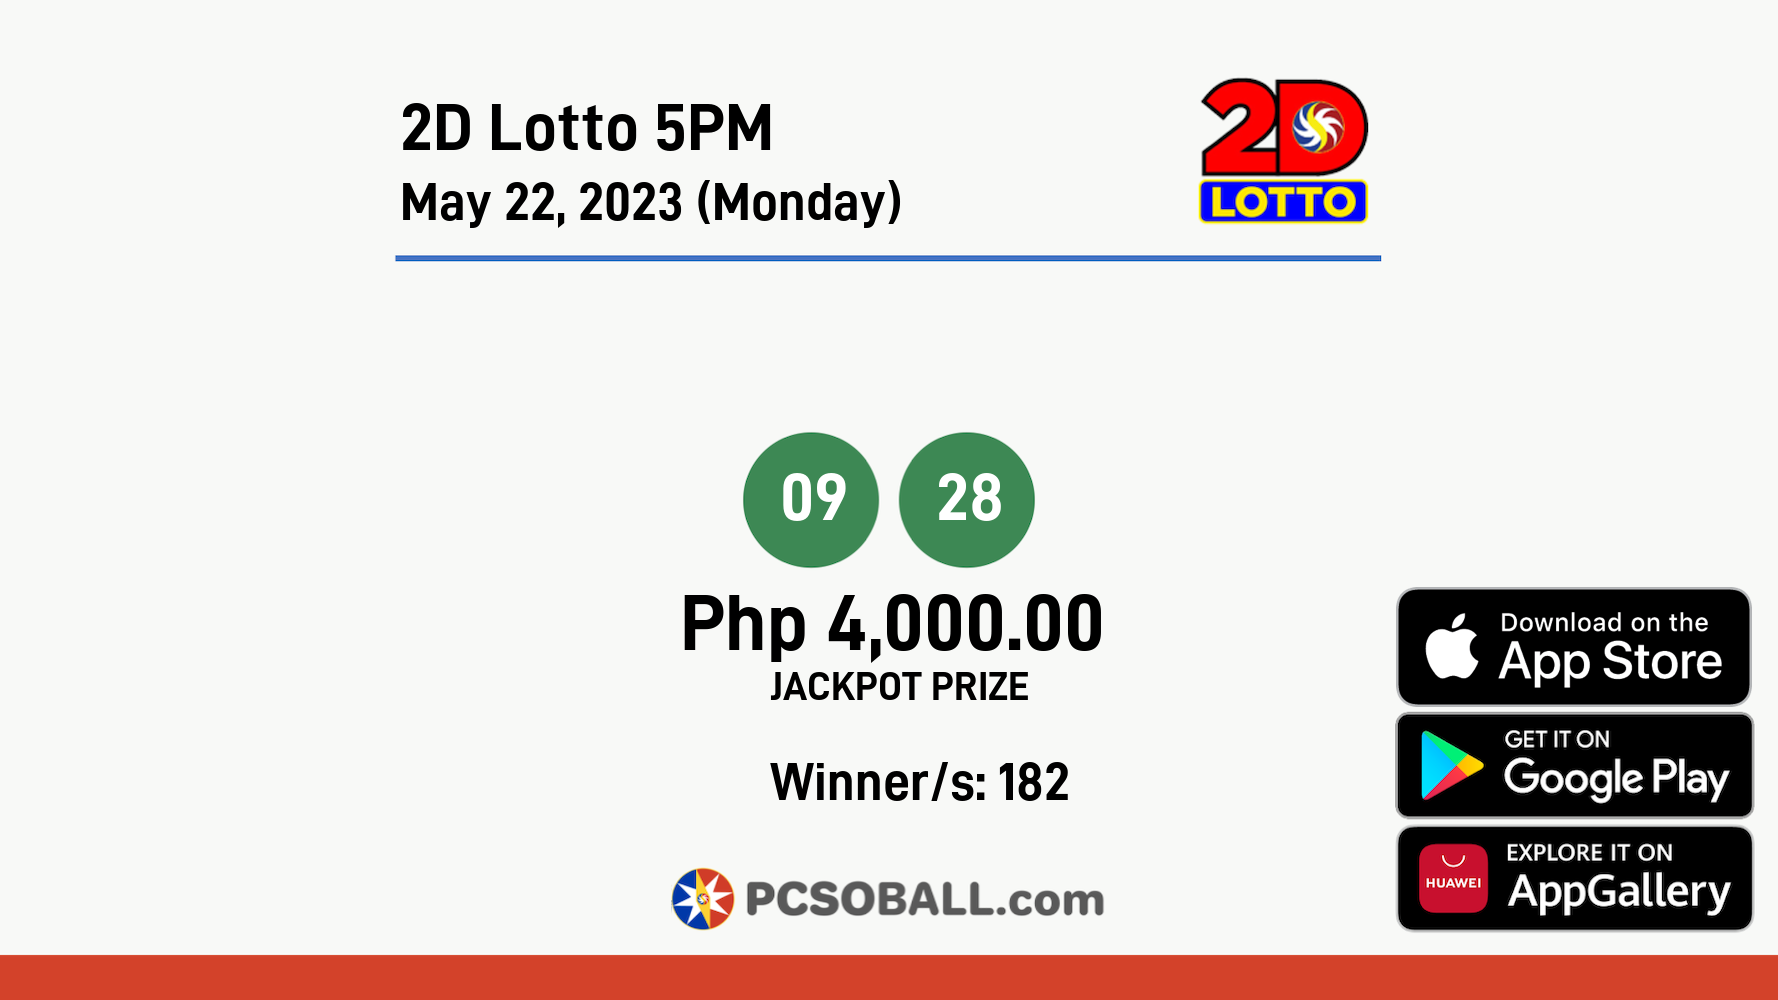 2D Lotto 5PM May 22, 2023 (Monday) Result